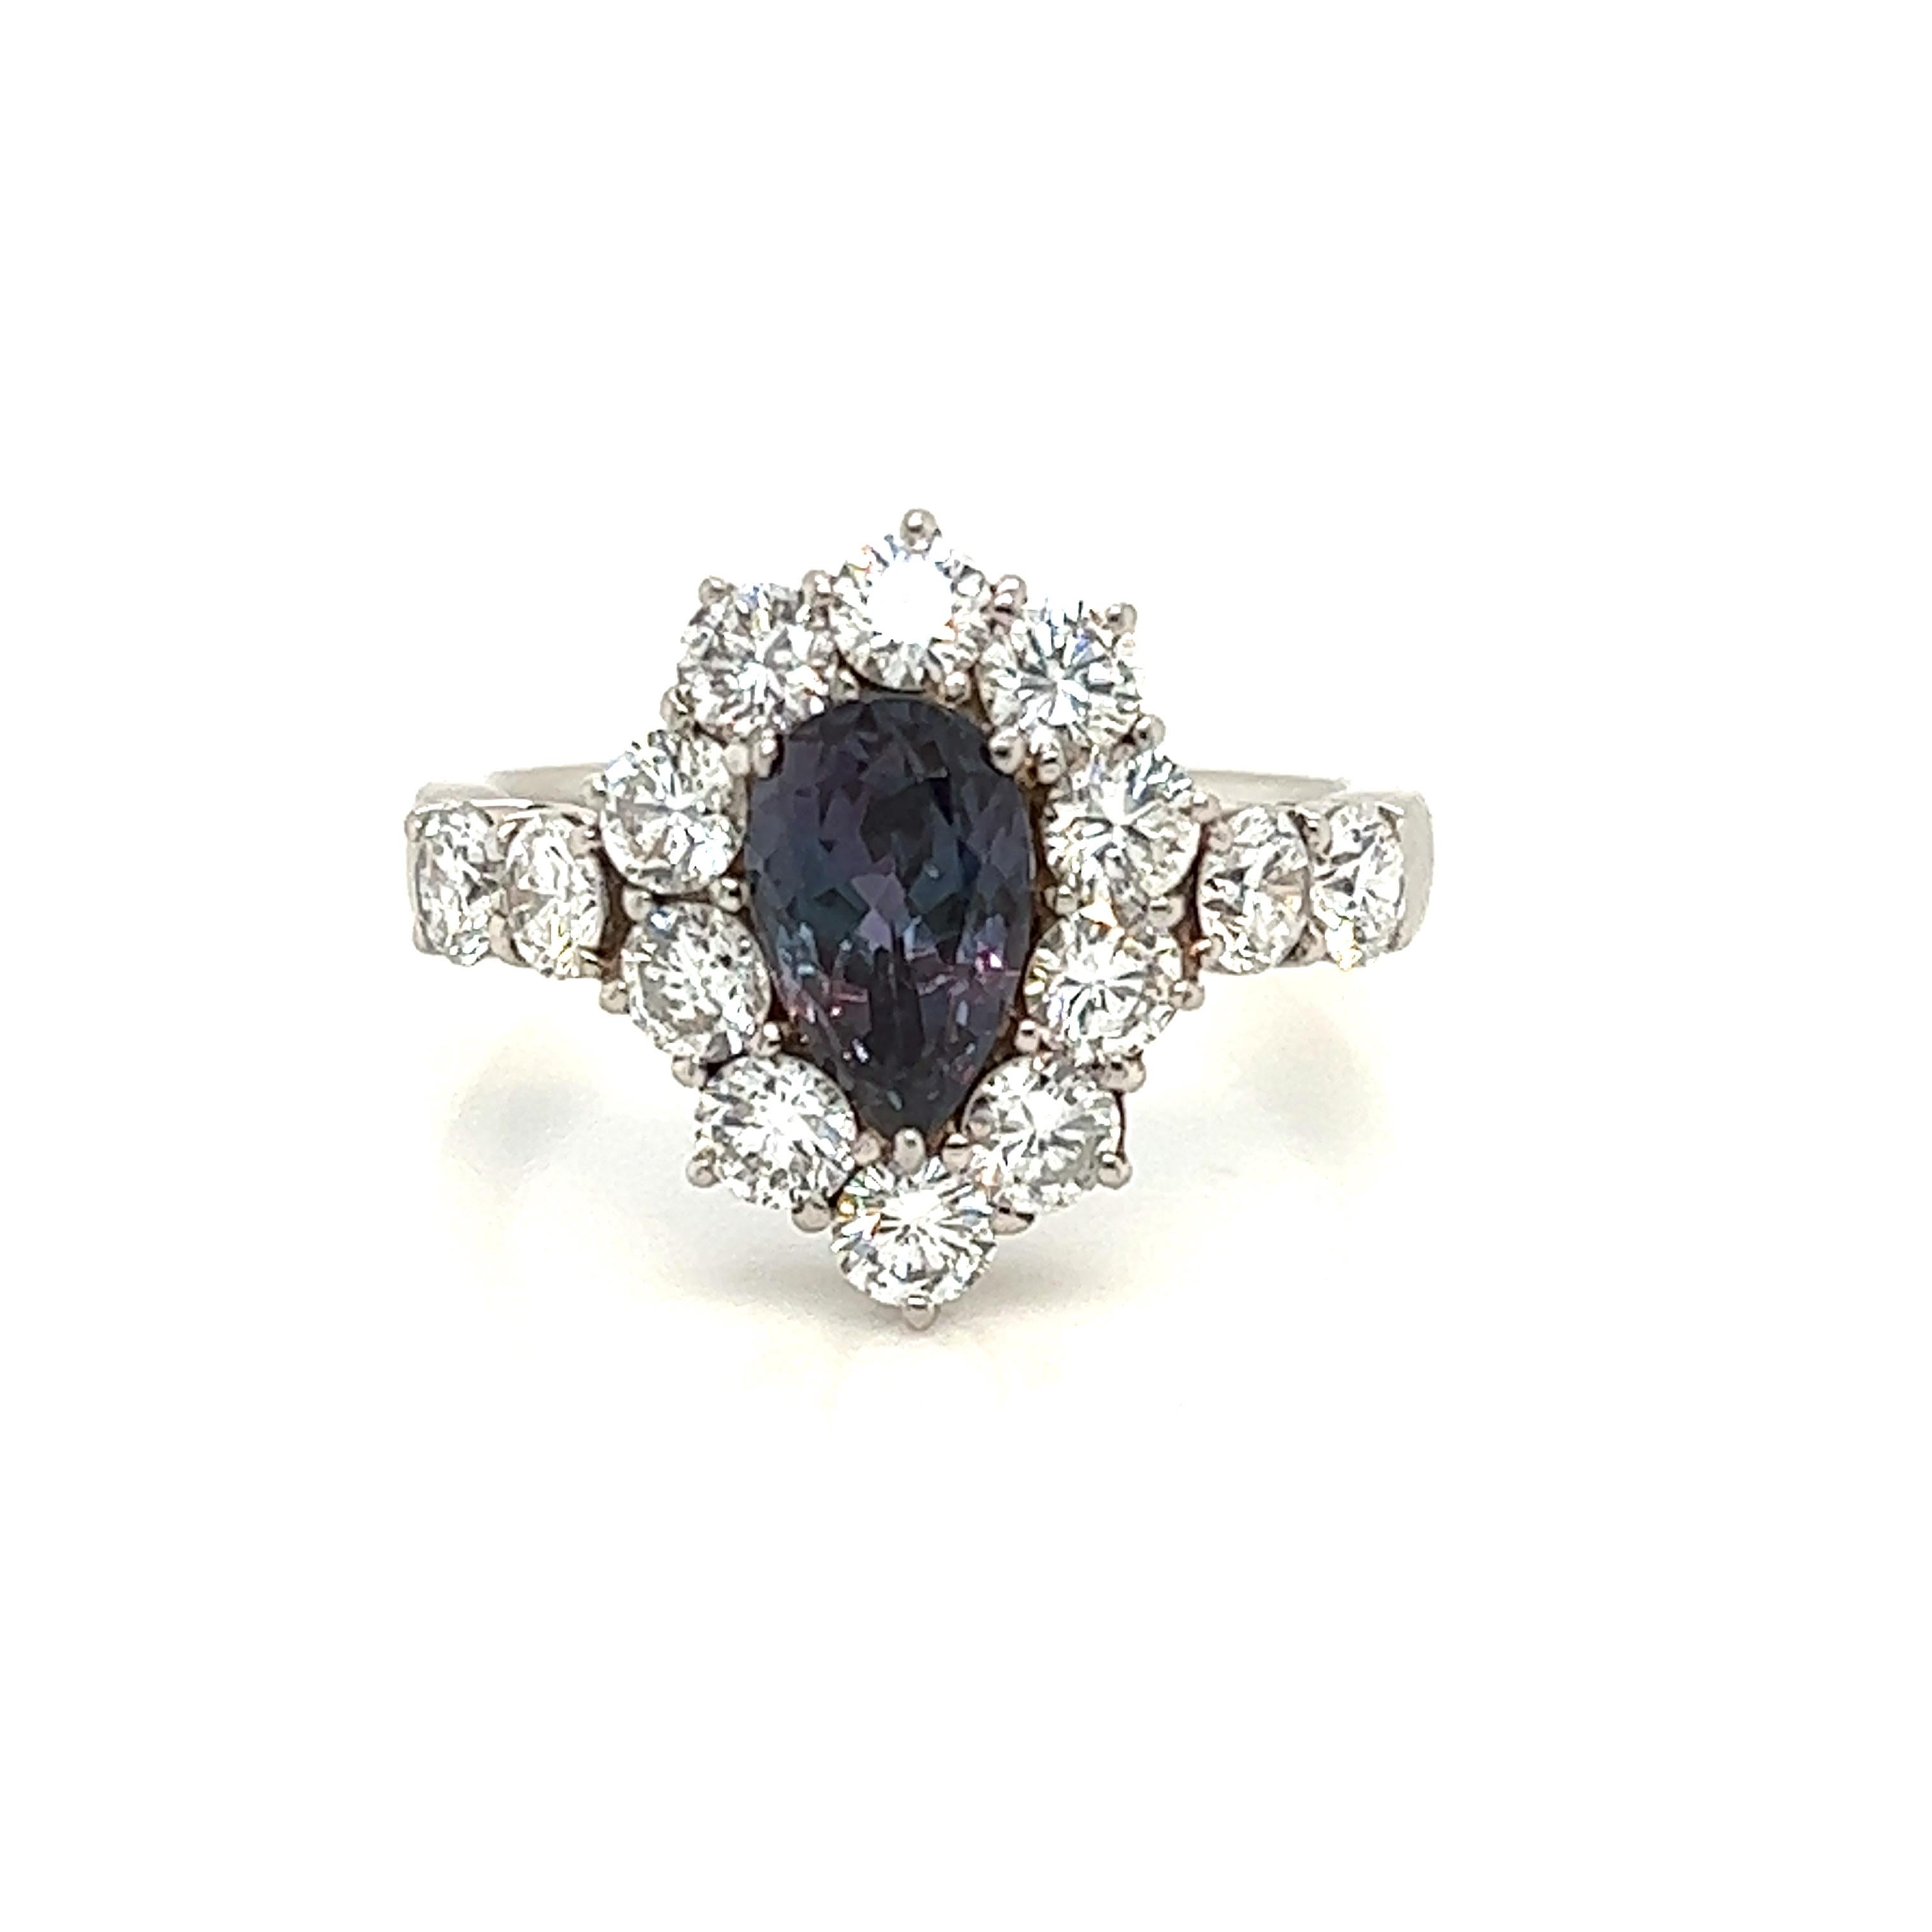 This is a gorgeous natural AAA quality pear Alexandrite surrounded by dainty diamonds that is set in a vintage platinum setting. This ring features a natural 1.35 carat pear alexandrite that is certified by the Gemological Institute of America (GIA)